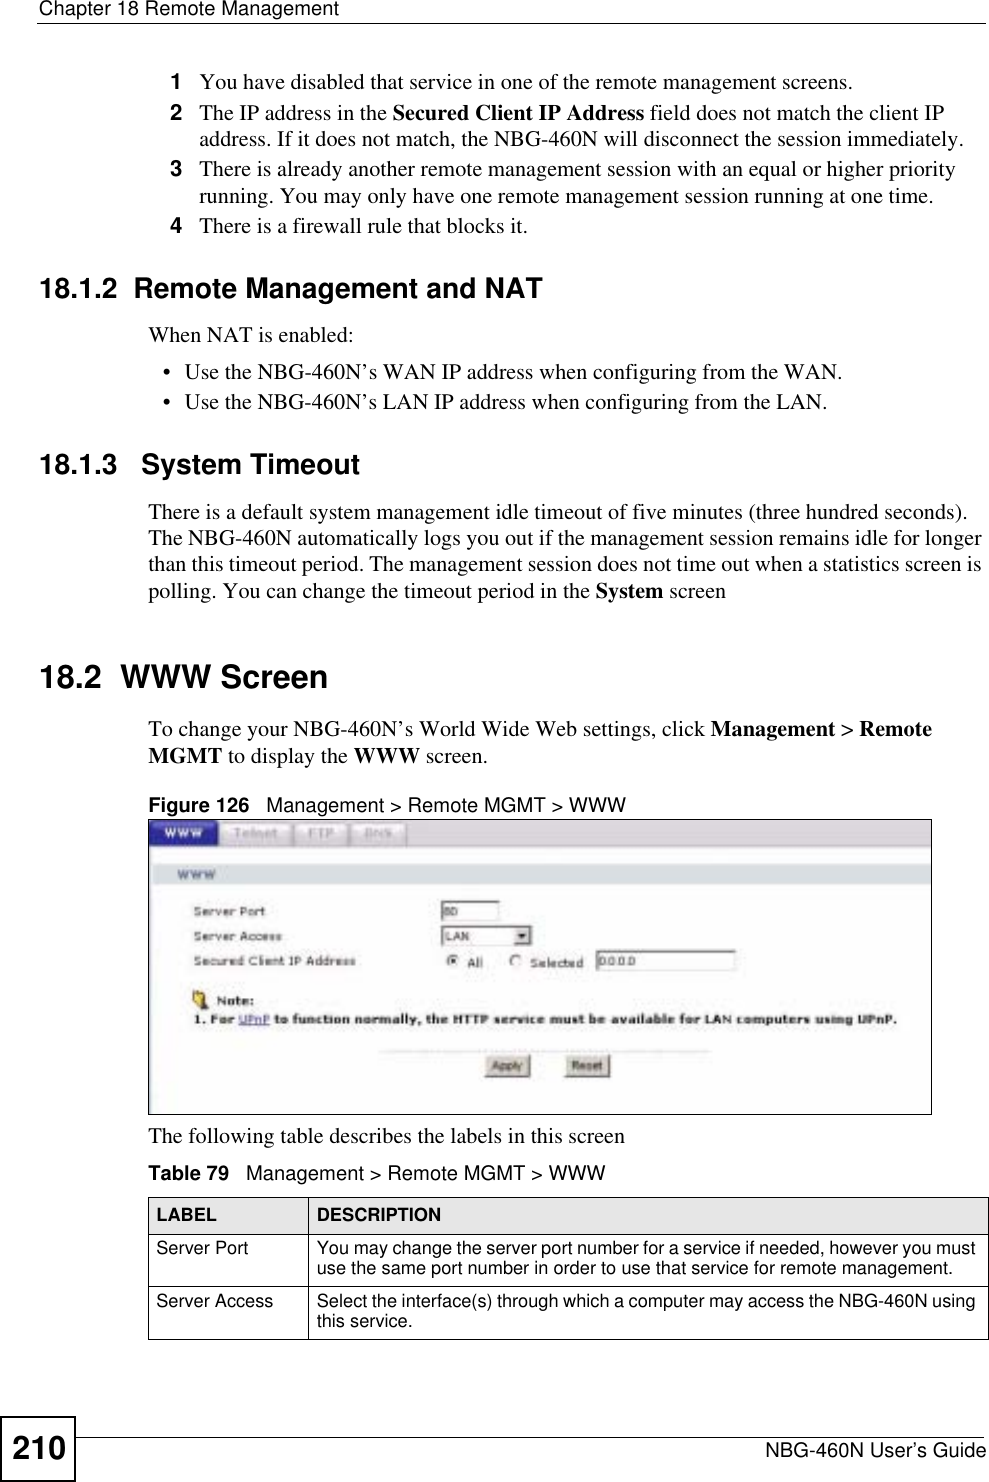 Chapter 18 Remote ManagementNBG-460N User’s Guide2101You have disabled that service in one of the remote management screens.2The IP address in the Secured Client IP Address field does not match the client IP address. If it does not match, the NBG-460N will disconnect the session immediately.3There is already another remote management session with an equal or higher priority running. You may only have one remote management session running at one time.4There is a firewall rule that blocks it.18.1.2  Remote Management and NATWhen NAT is enabled:• Use the NBG-460N’s WAN IP address when configuring from the WAN. • Use the NBG-460N’s LAN IP address when configuring from the LAN.18.1.3   System TimeoutThere is a default system management idle timeout of five minutes (three hundred seconds). The NBG-460N automatically logs you out if the management session remains idle for longer than this timeout period. The management session does not time out when a statistics screen is polling. You can change the timeout period in the System screen18.2  WWW ScreenTo change your NBG-460N’s World Wide Web settings, click Management &gt; Remote MGMT to display the WWW screen.Figure 126   Management &gt; Remote MGMT &gt; WWW The following table describes the labels in this screenTable 79   Management &gt; Remote MGMT &gt; WWWLABEL DESCRIPTIONServer Port You may change the server port number for a service if needed, however you must use the same port number in order to use that service for remote management.Server Access Select the interface(s) through which a computer may access the NBG-460N using this service.